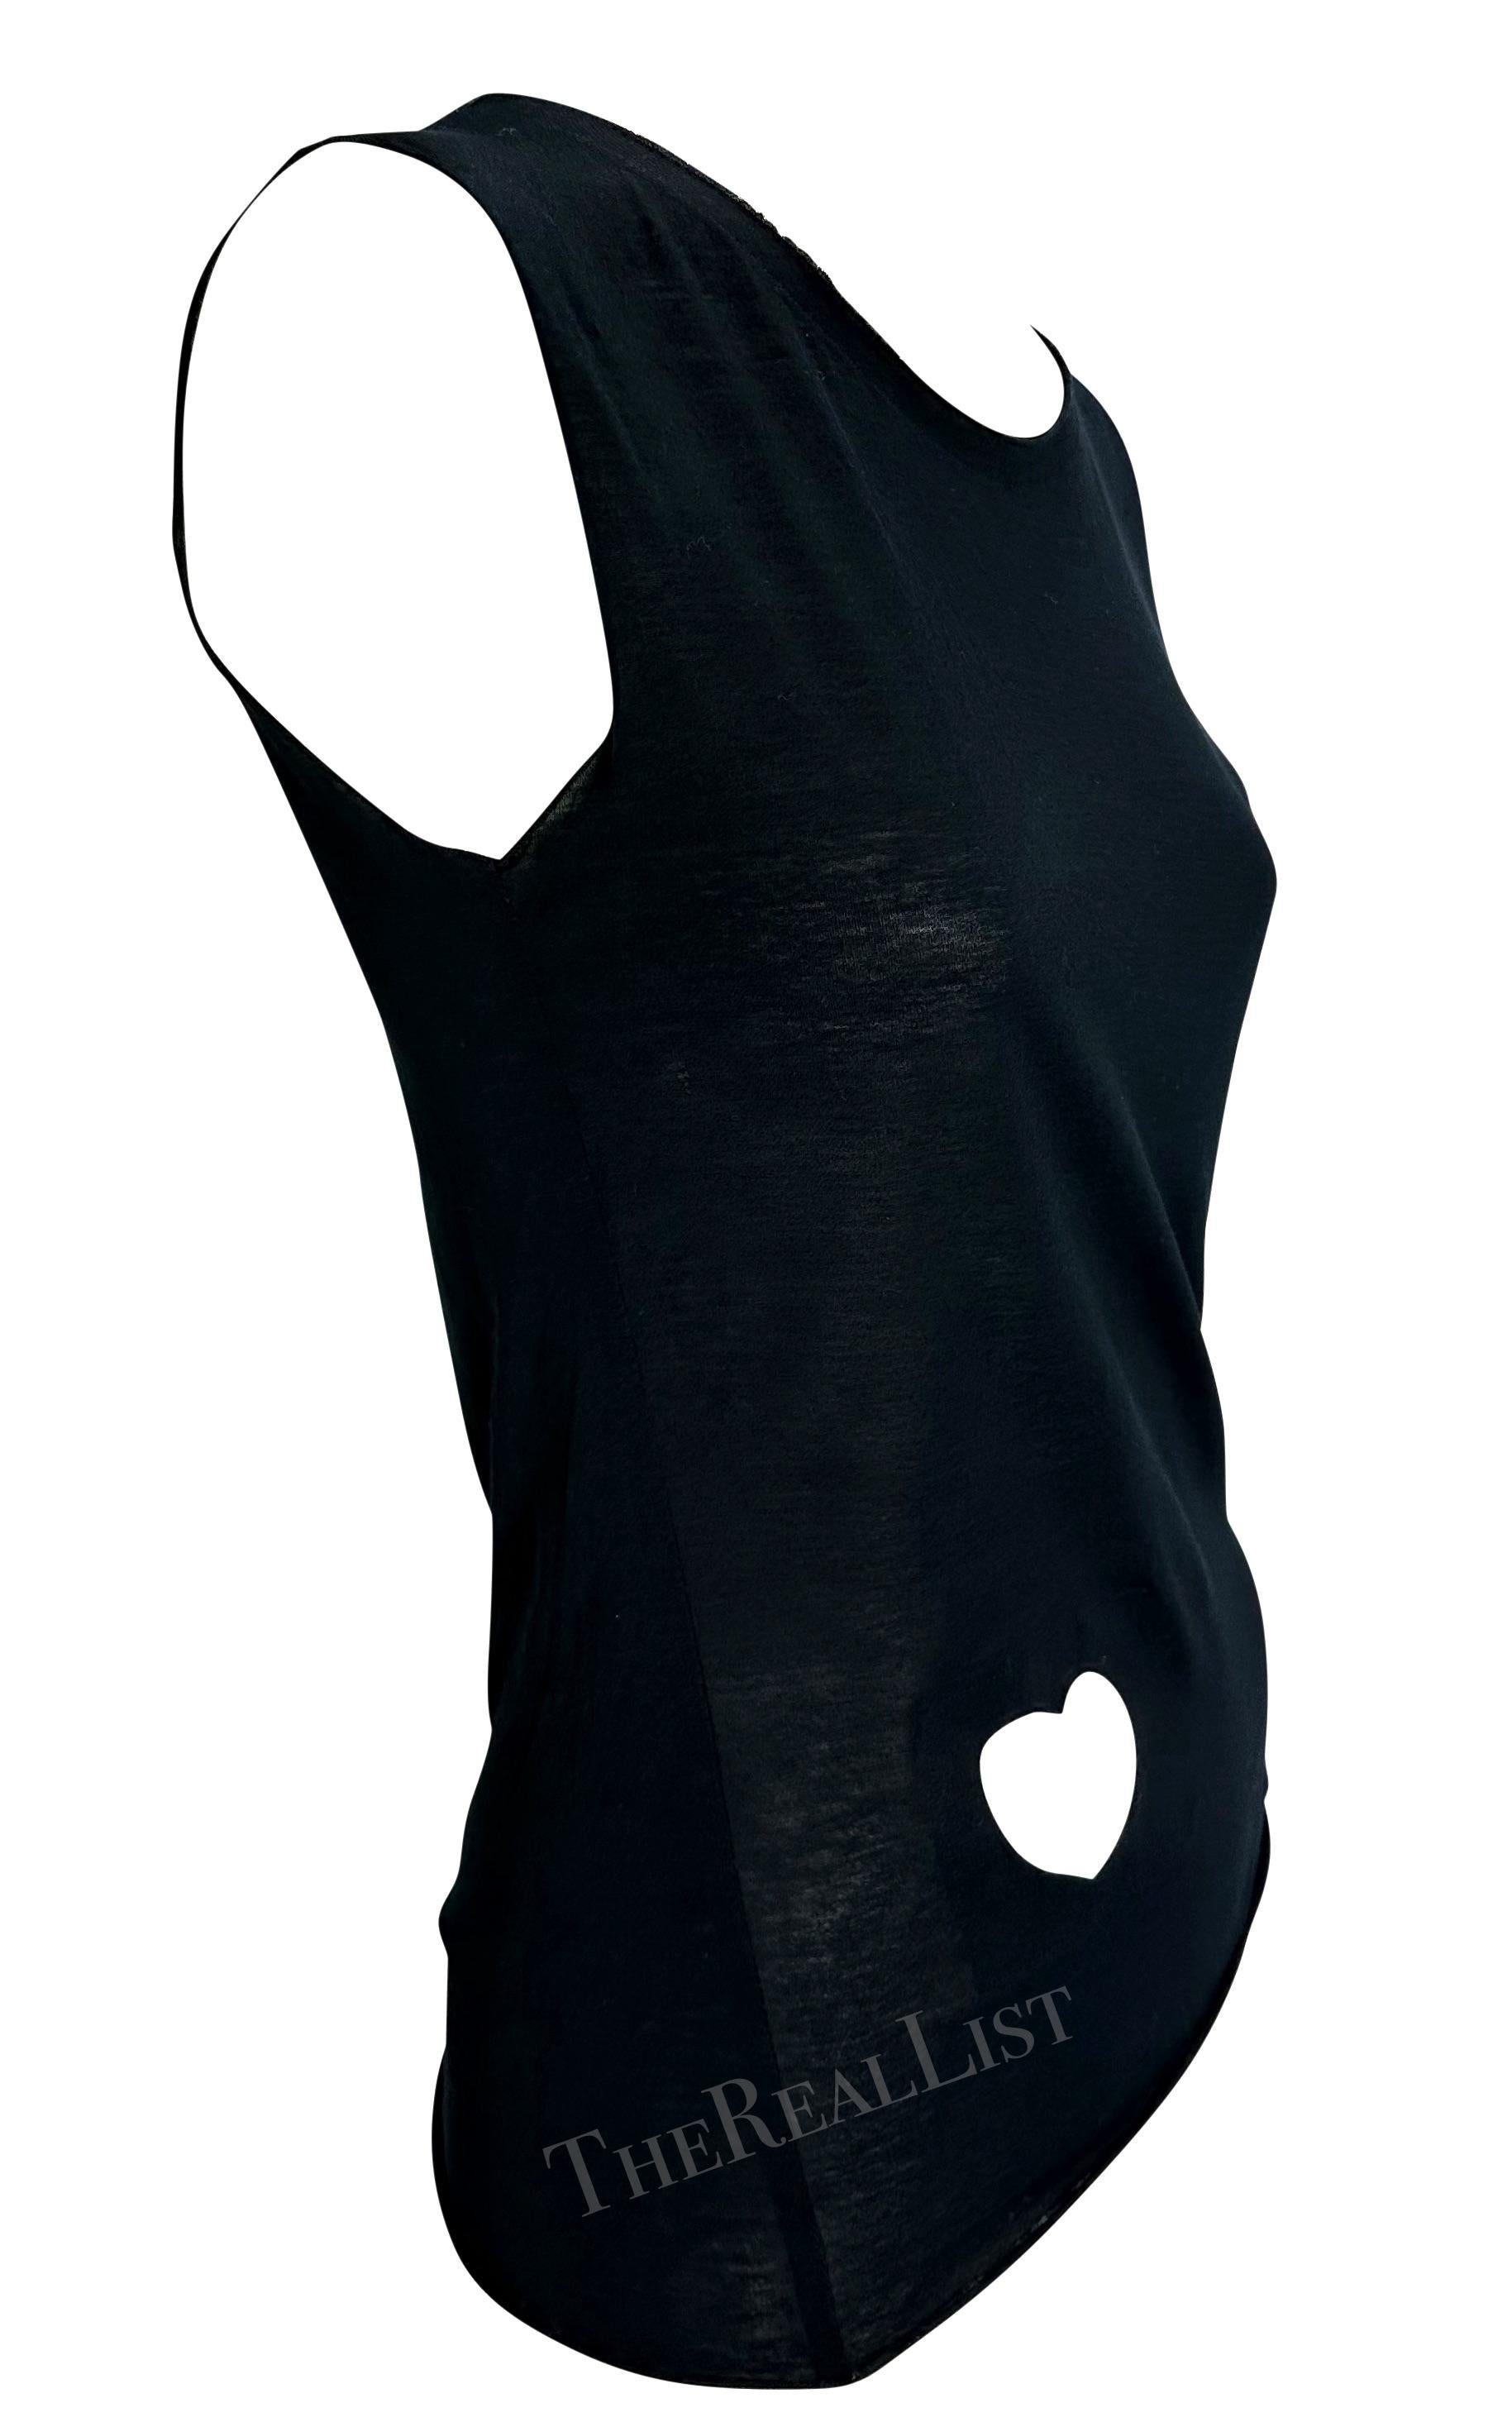 S/S 2002 Gucci by Tom Ford Runway Heart Cutout Black Sheer Tank Top For Sale 4